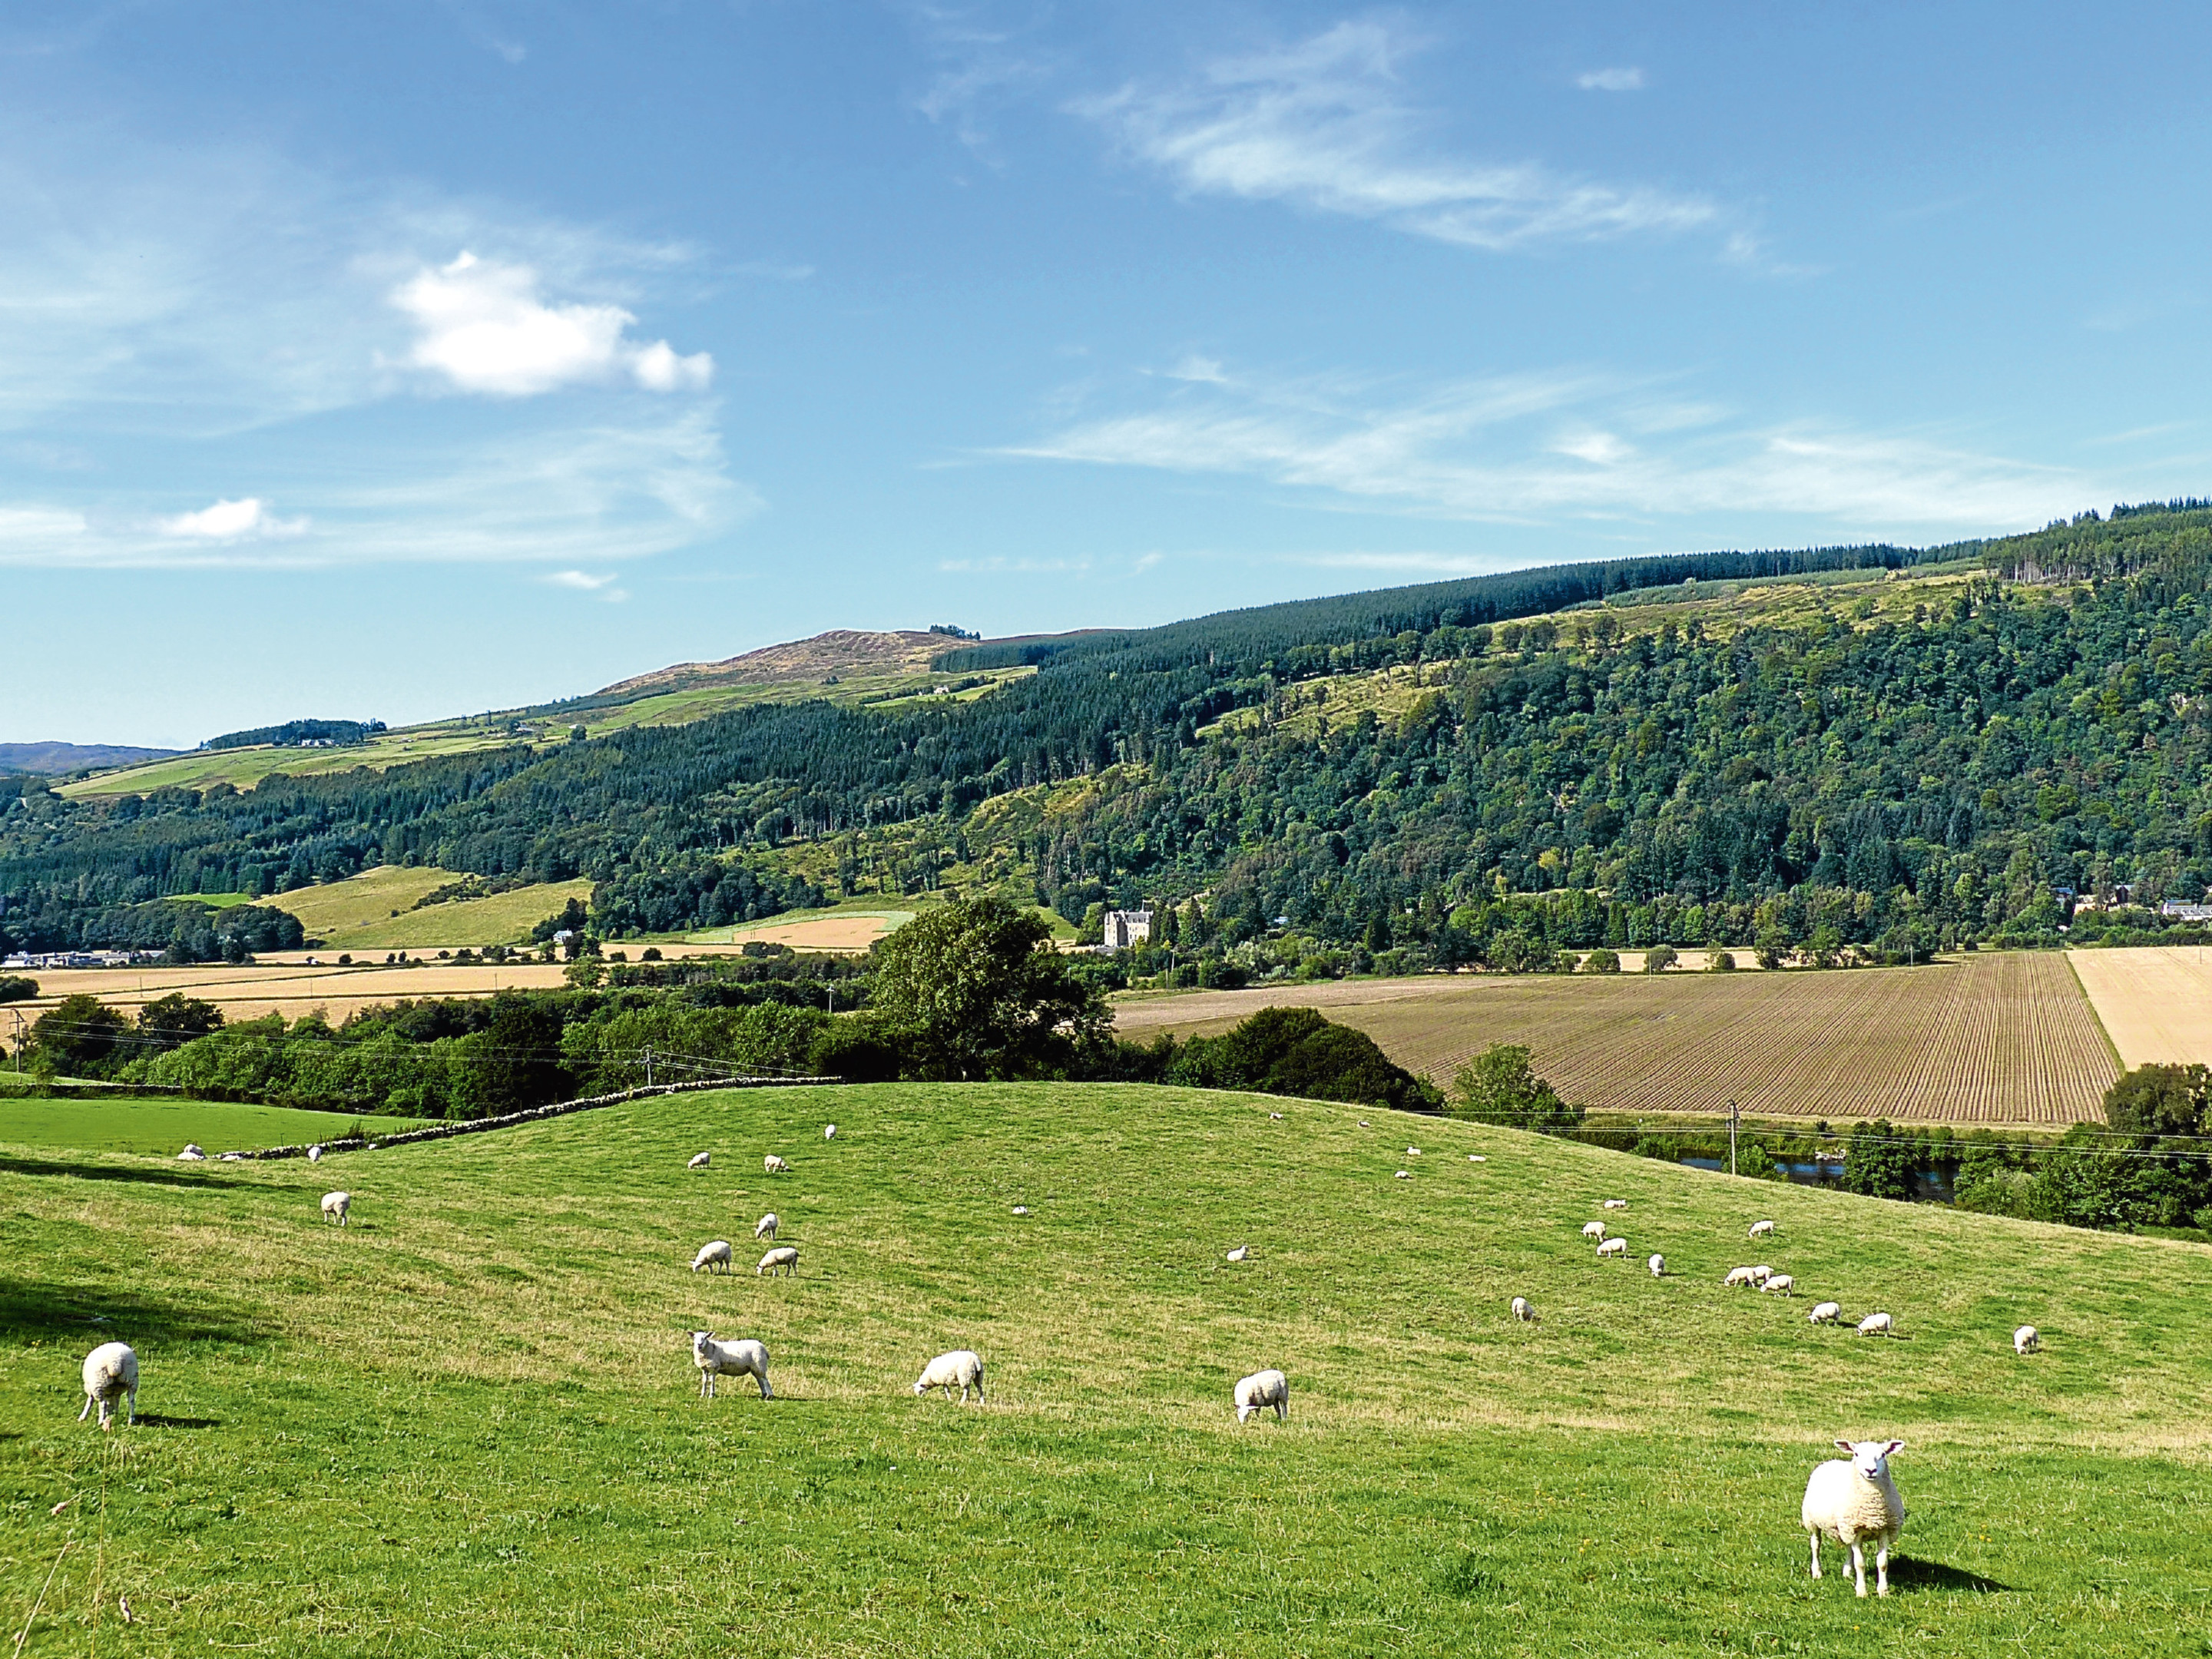 Farming organisations from across the UK have united in a call to Governments to work together